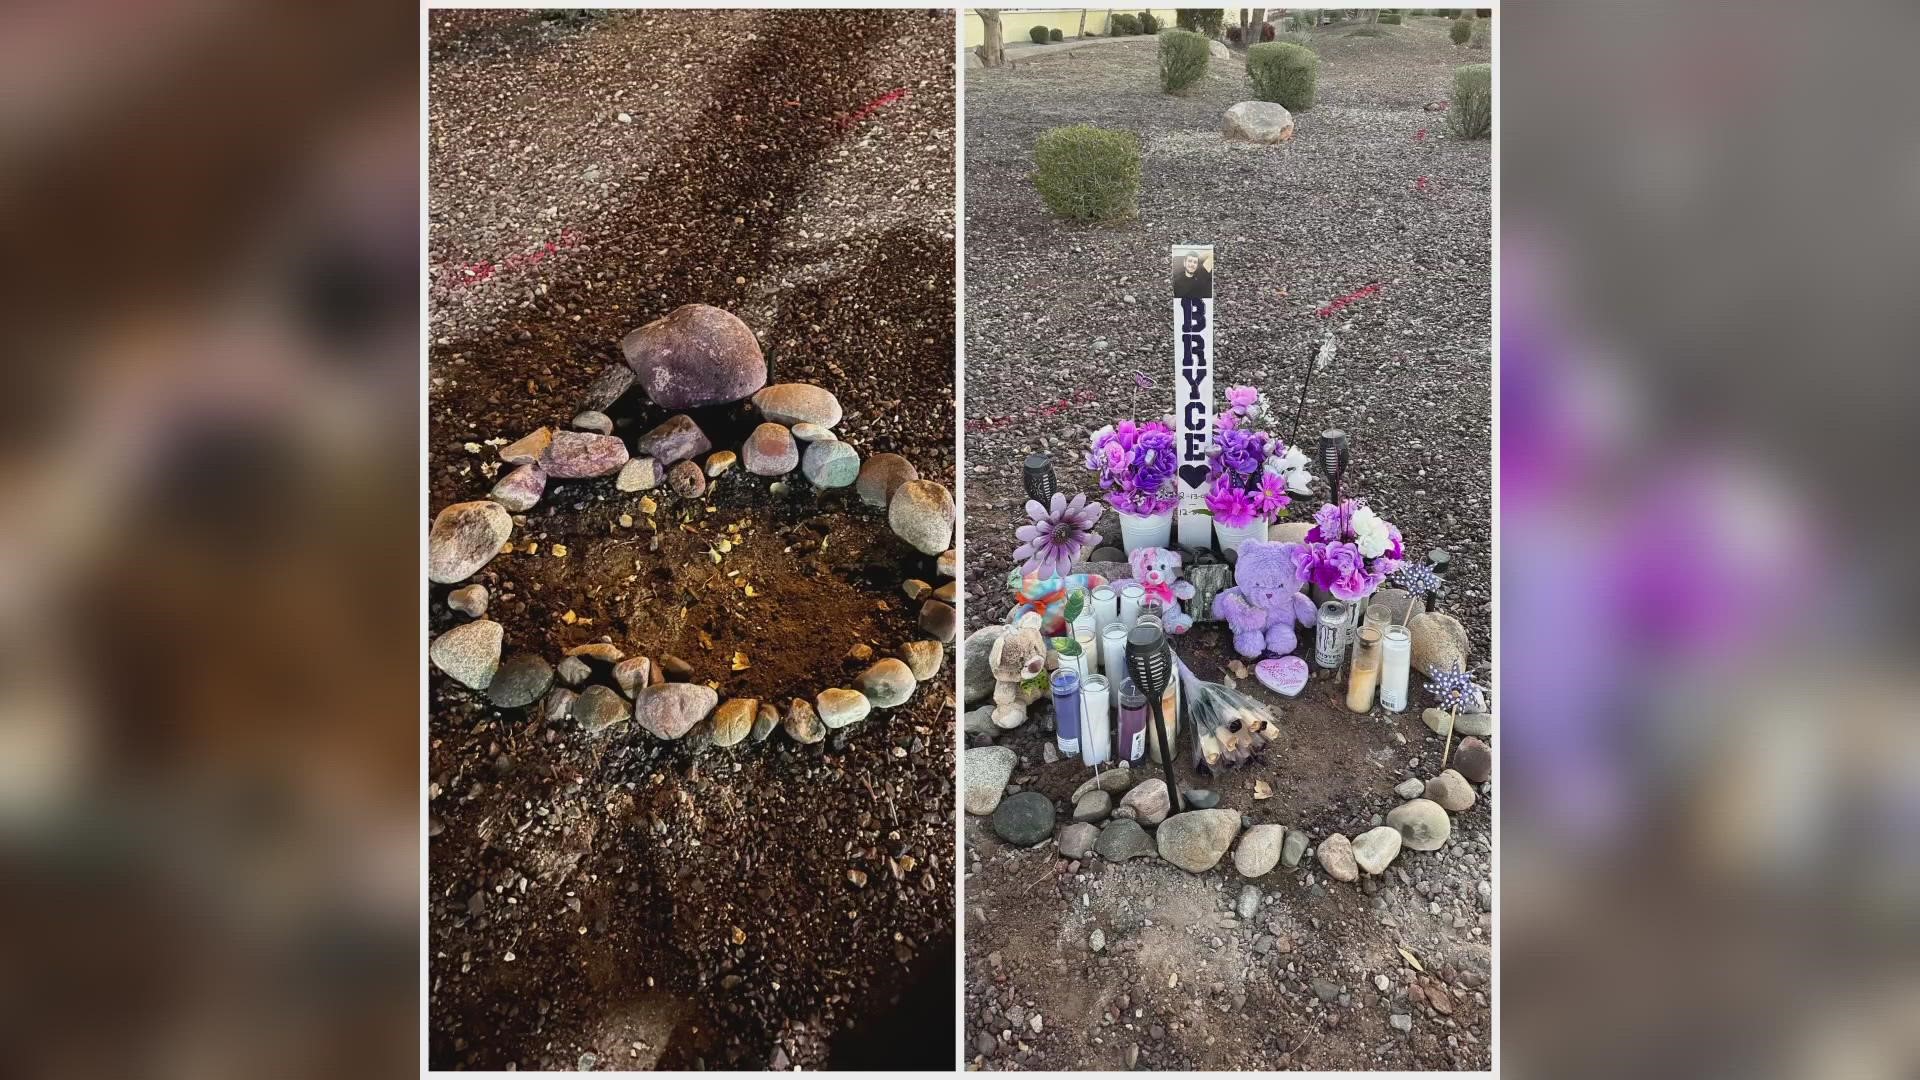 The family of 19-year-old Bryce Burgess set up a memorial near where the motorcyclist died on Dec. 23. But someone has apparently destroyed it.